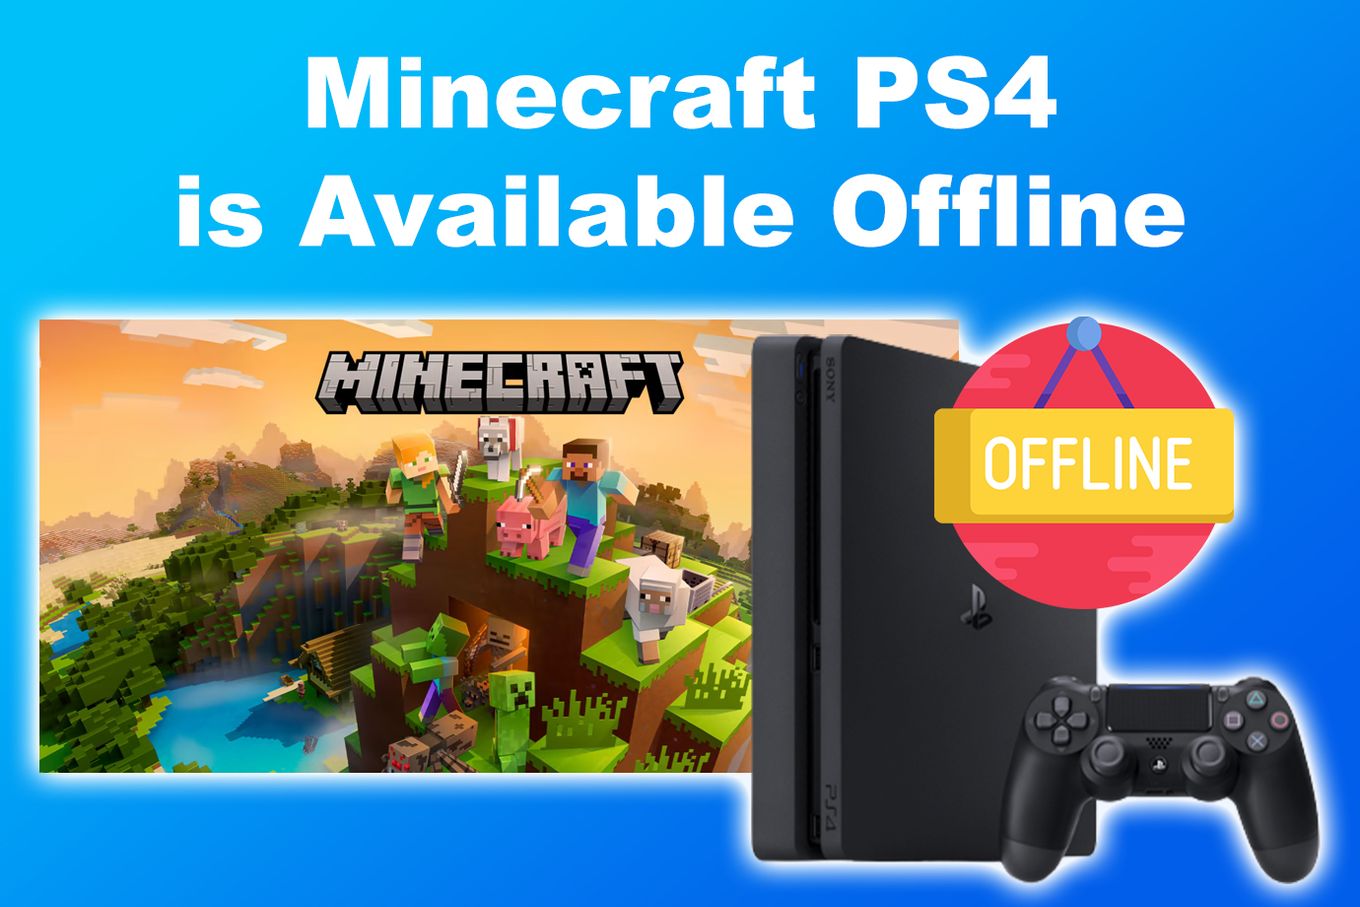 Minecraft PS4 is Available Offline